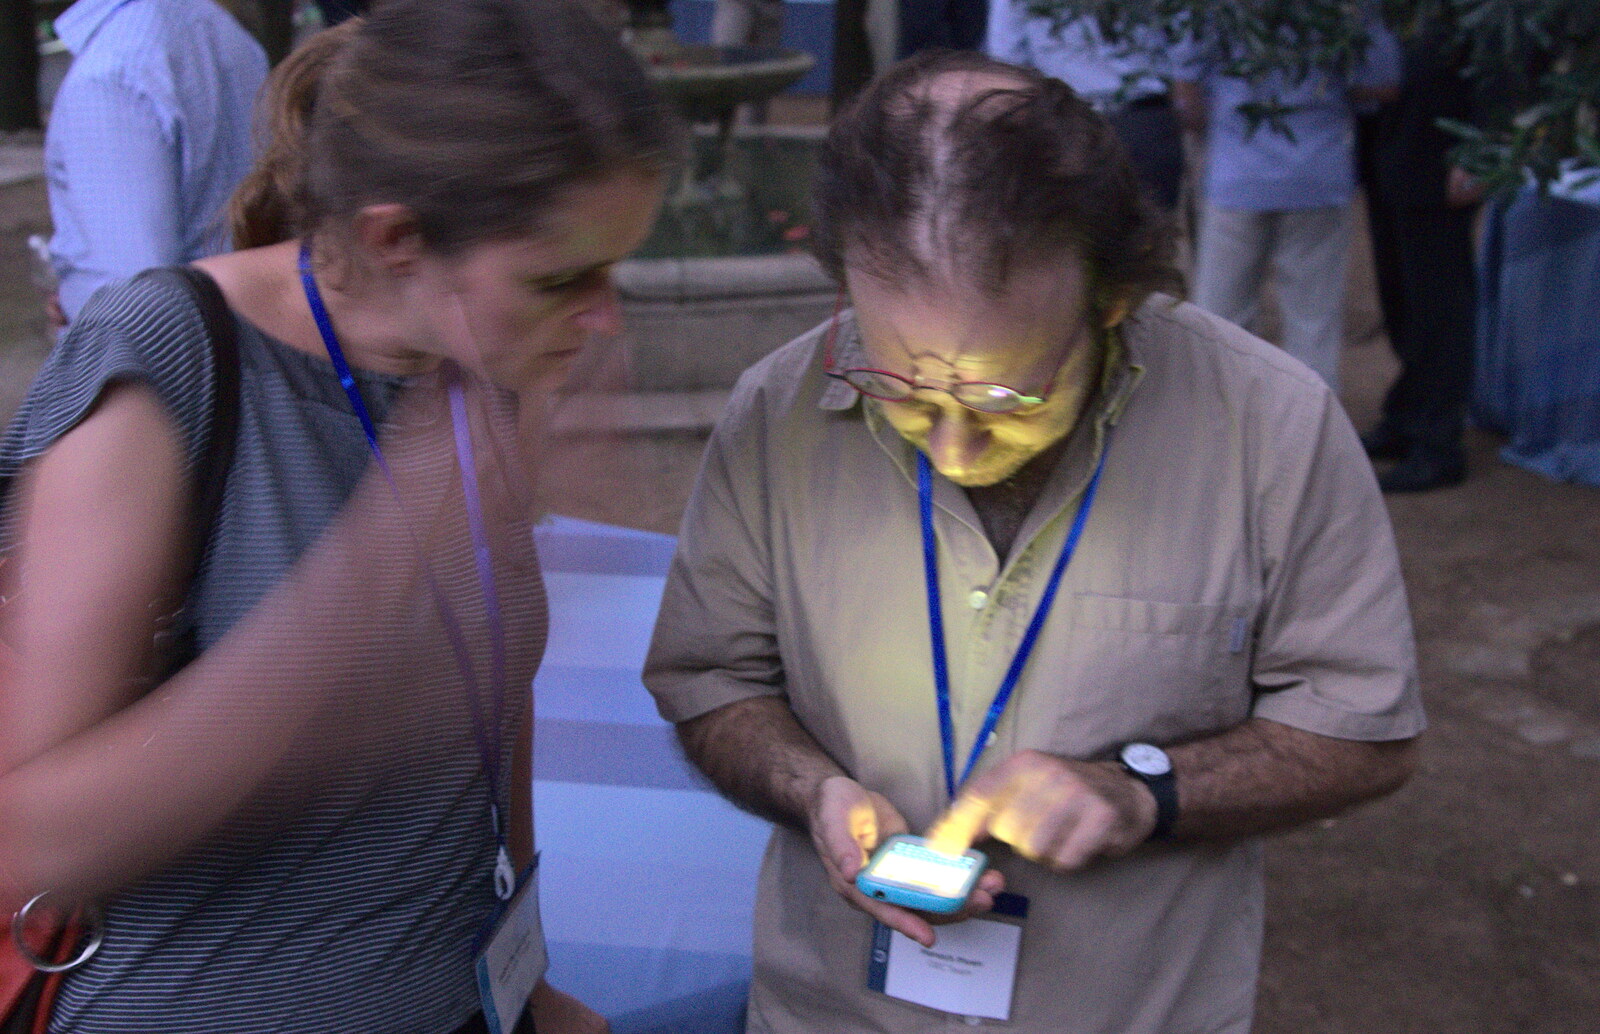 By the light of a mobile phone from The Open Education Challenge, Barcelona, Catalonia - 13th July 2014